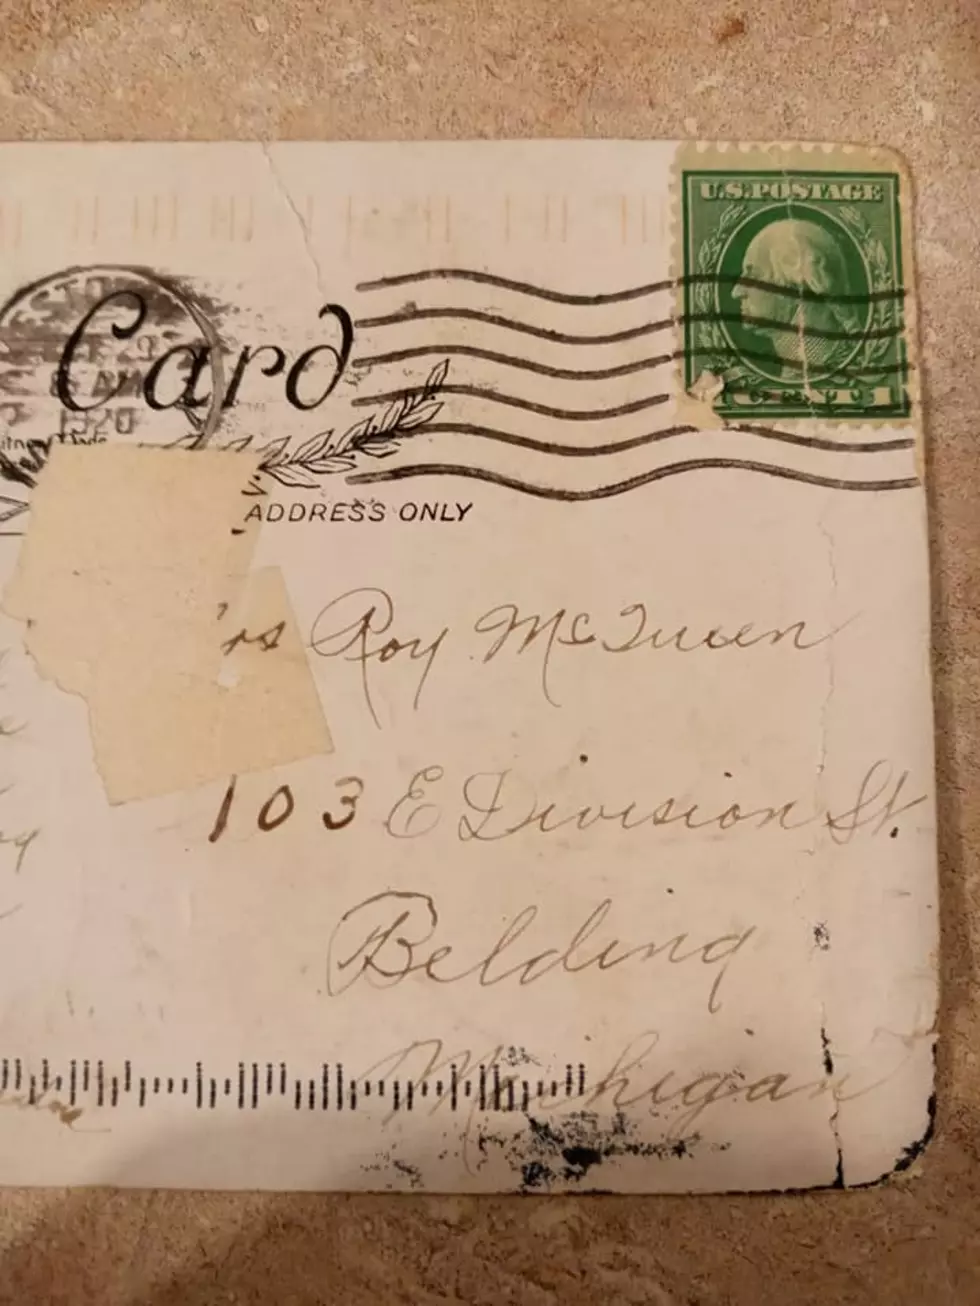 Belding Woman Gets Postcard From 100 Years Ago